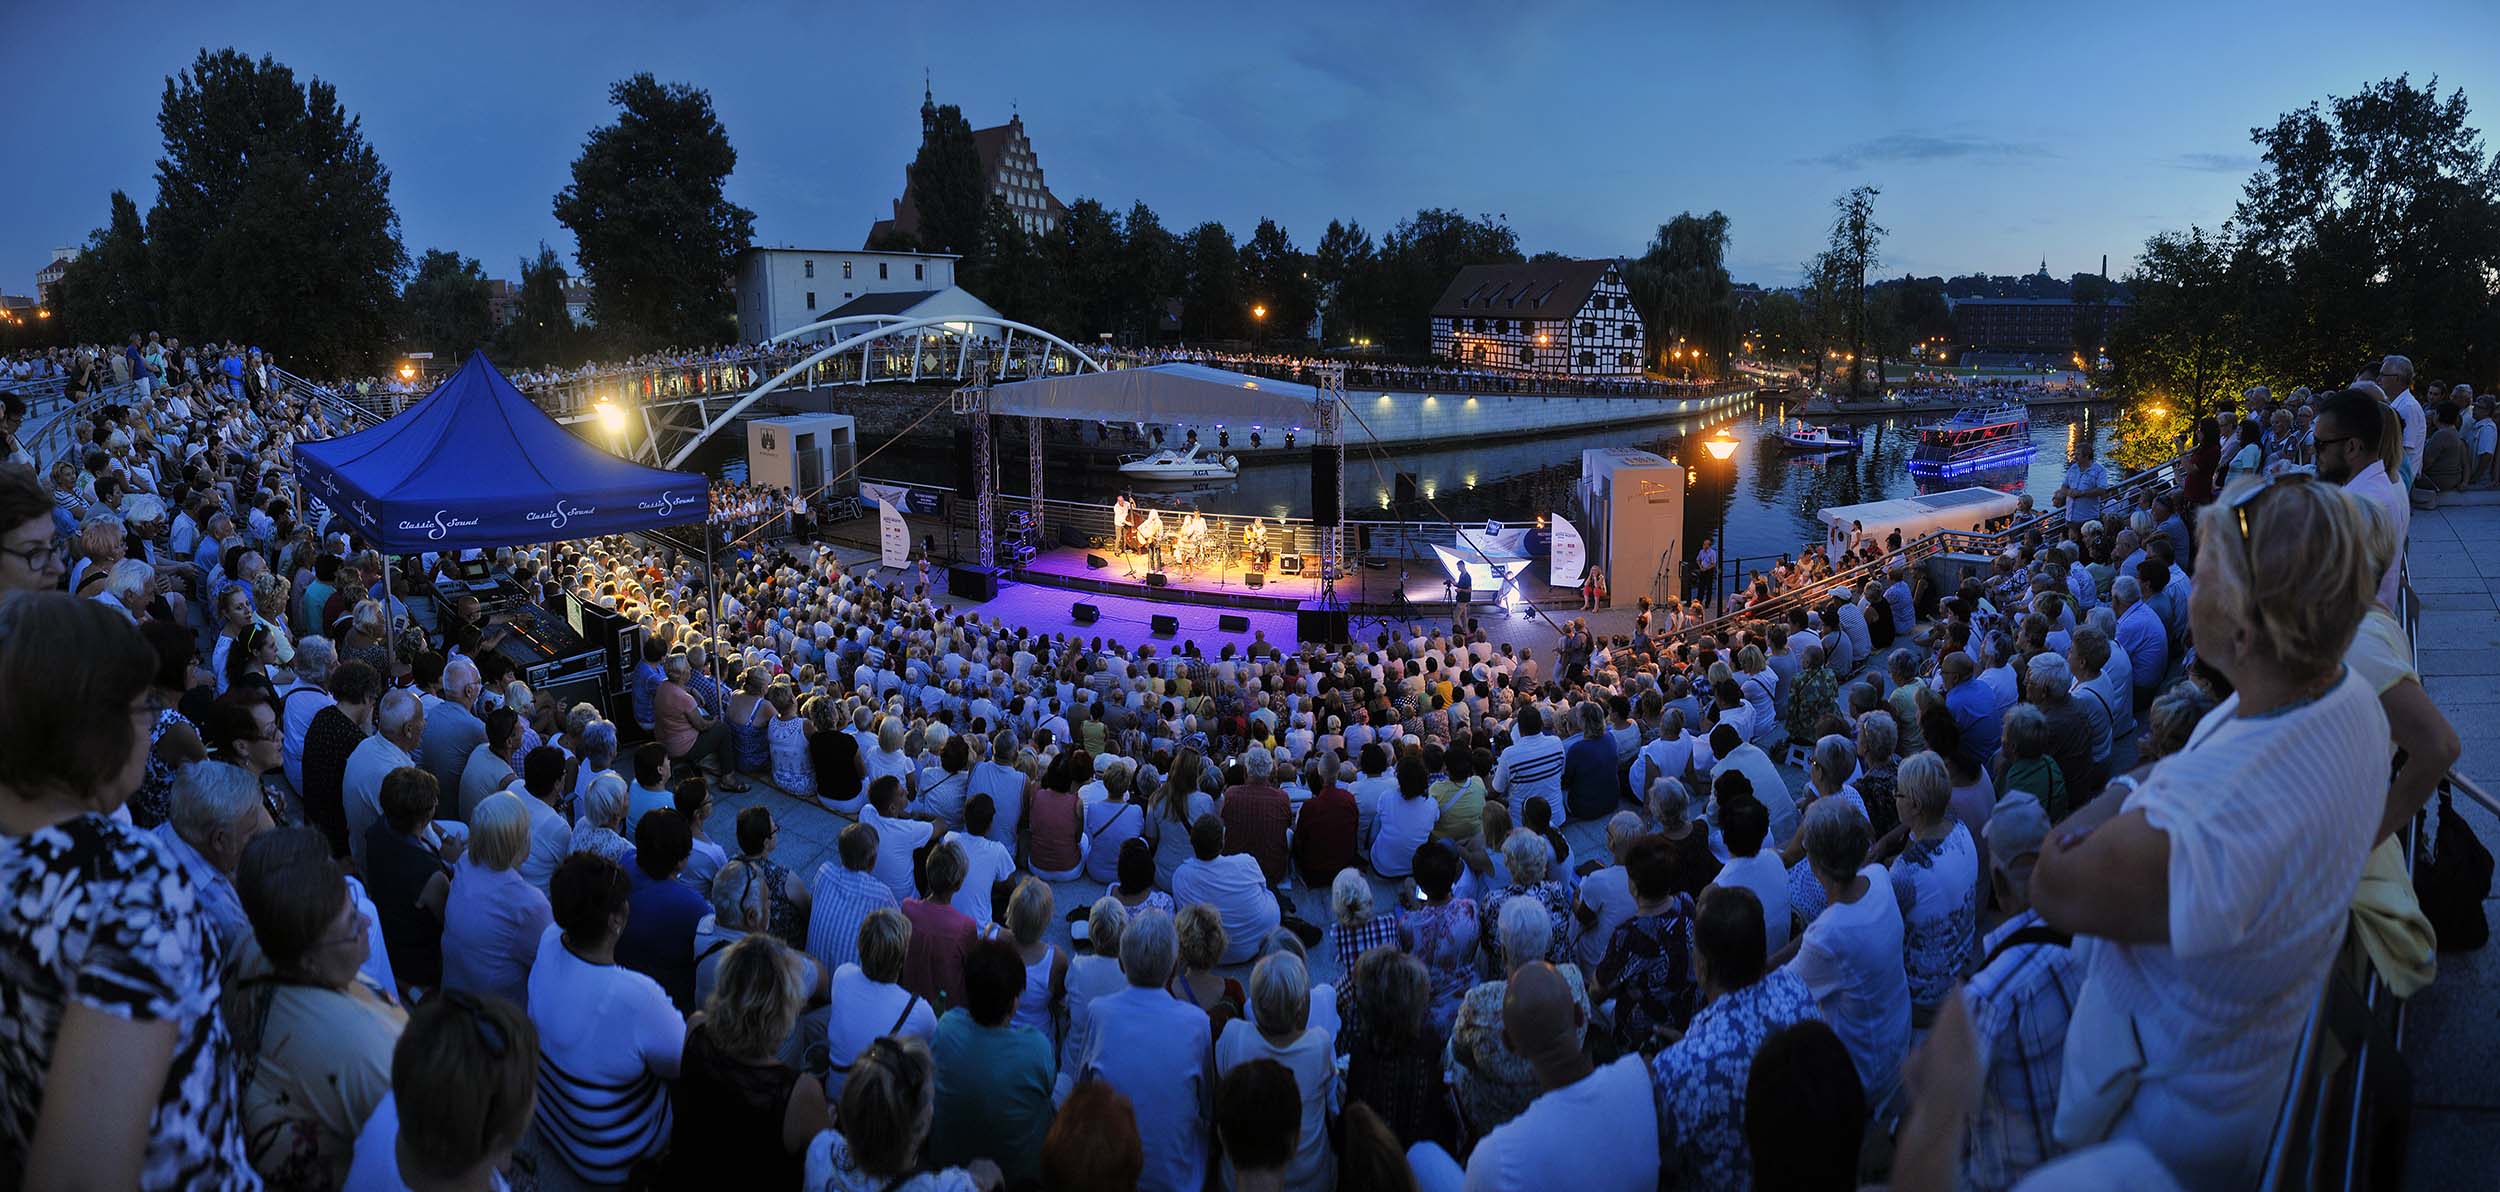 Bydgoszcz | attractions by the river | River of Music